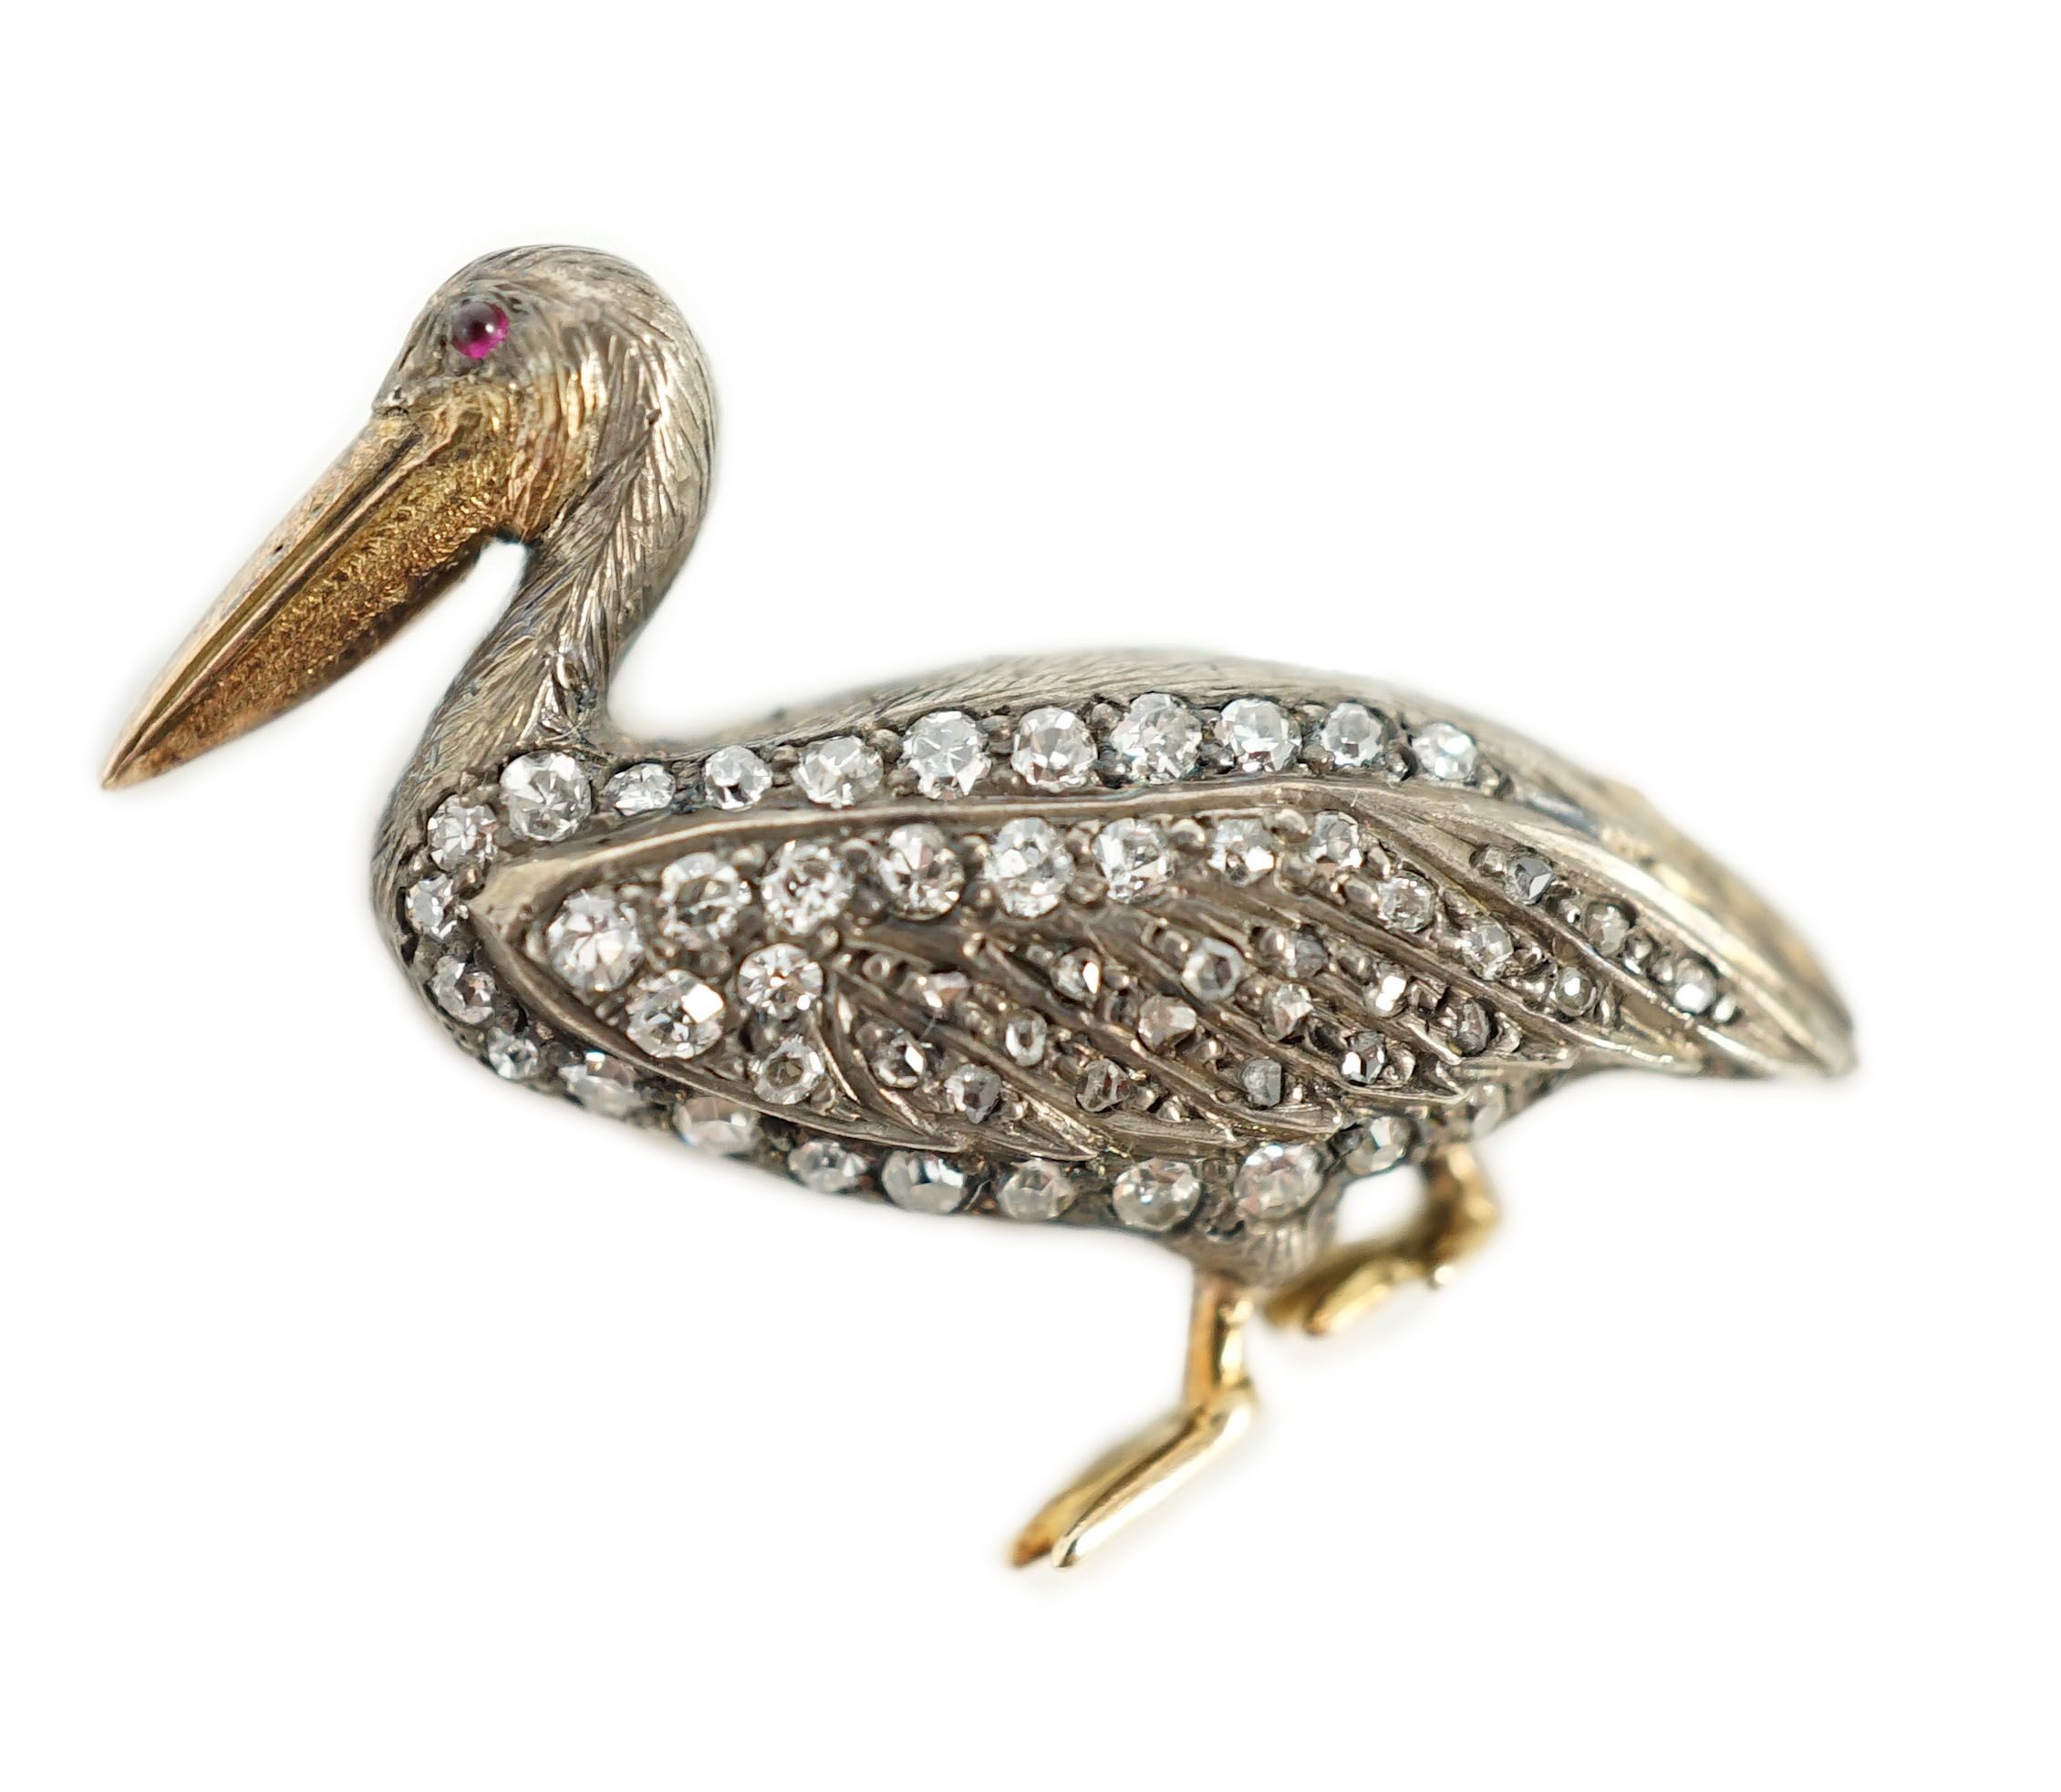 A Victorian style diamond encrusted and ruby set brooch, modelled as a pelican